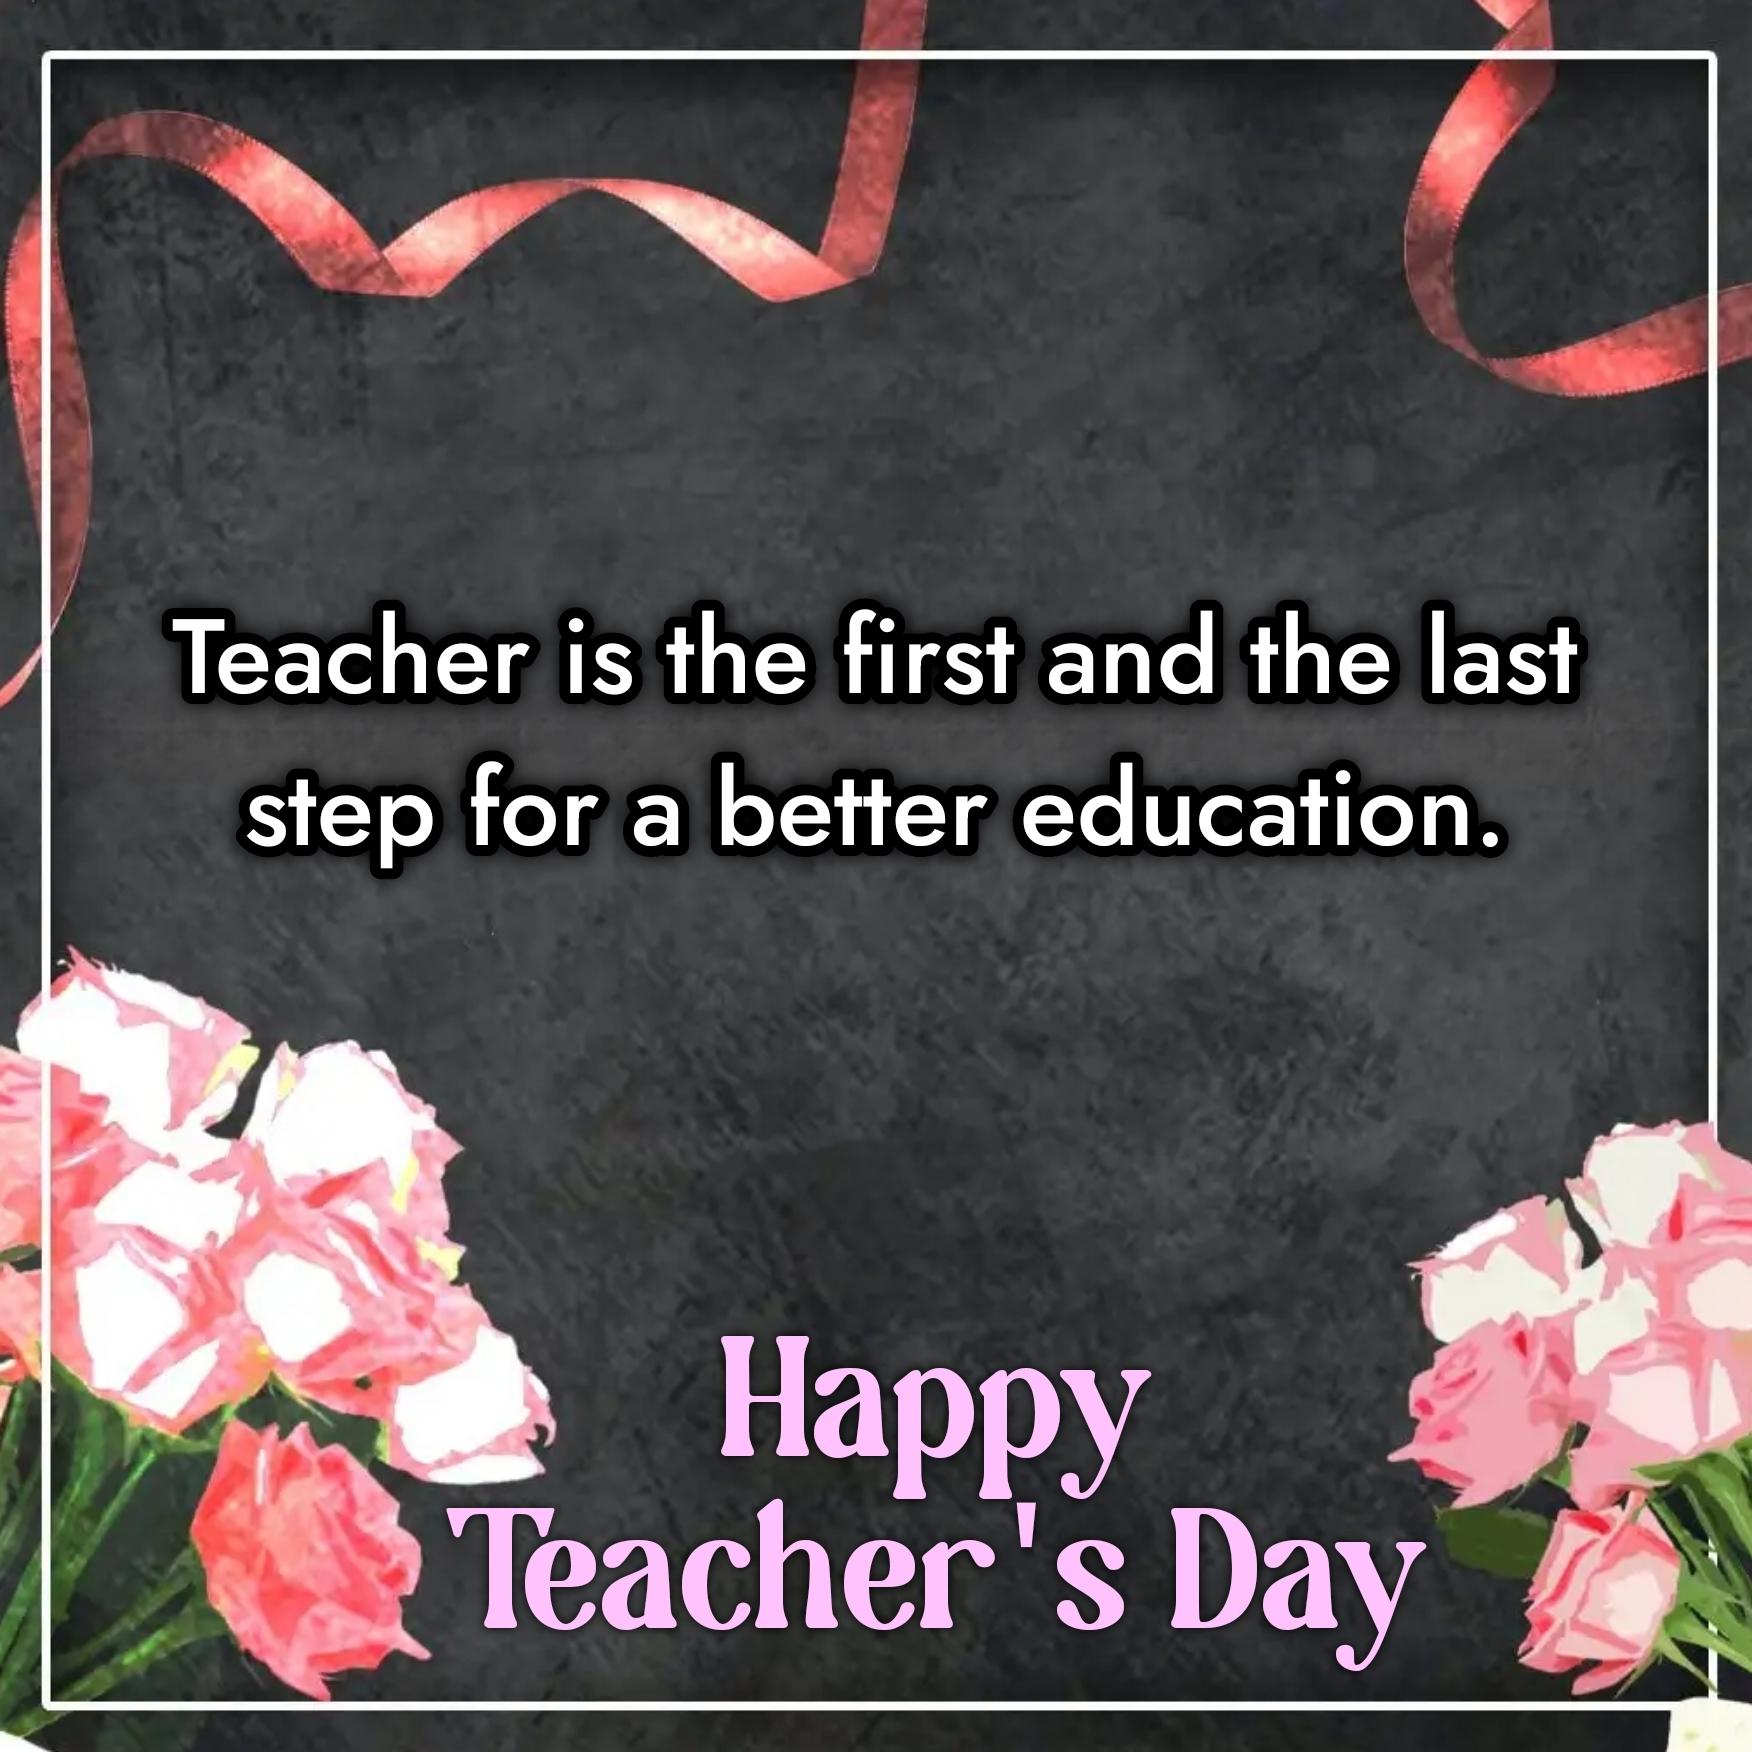 Teacher is the first and the last step for a better education